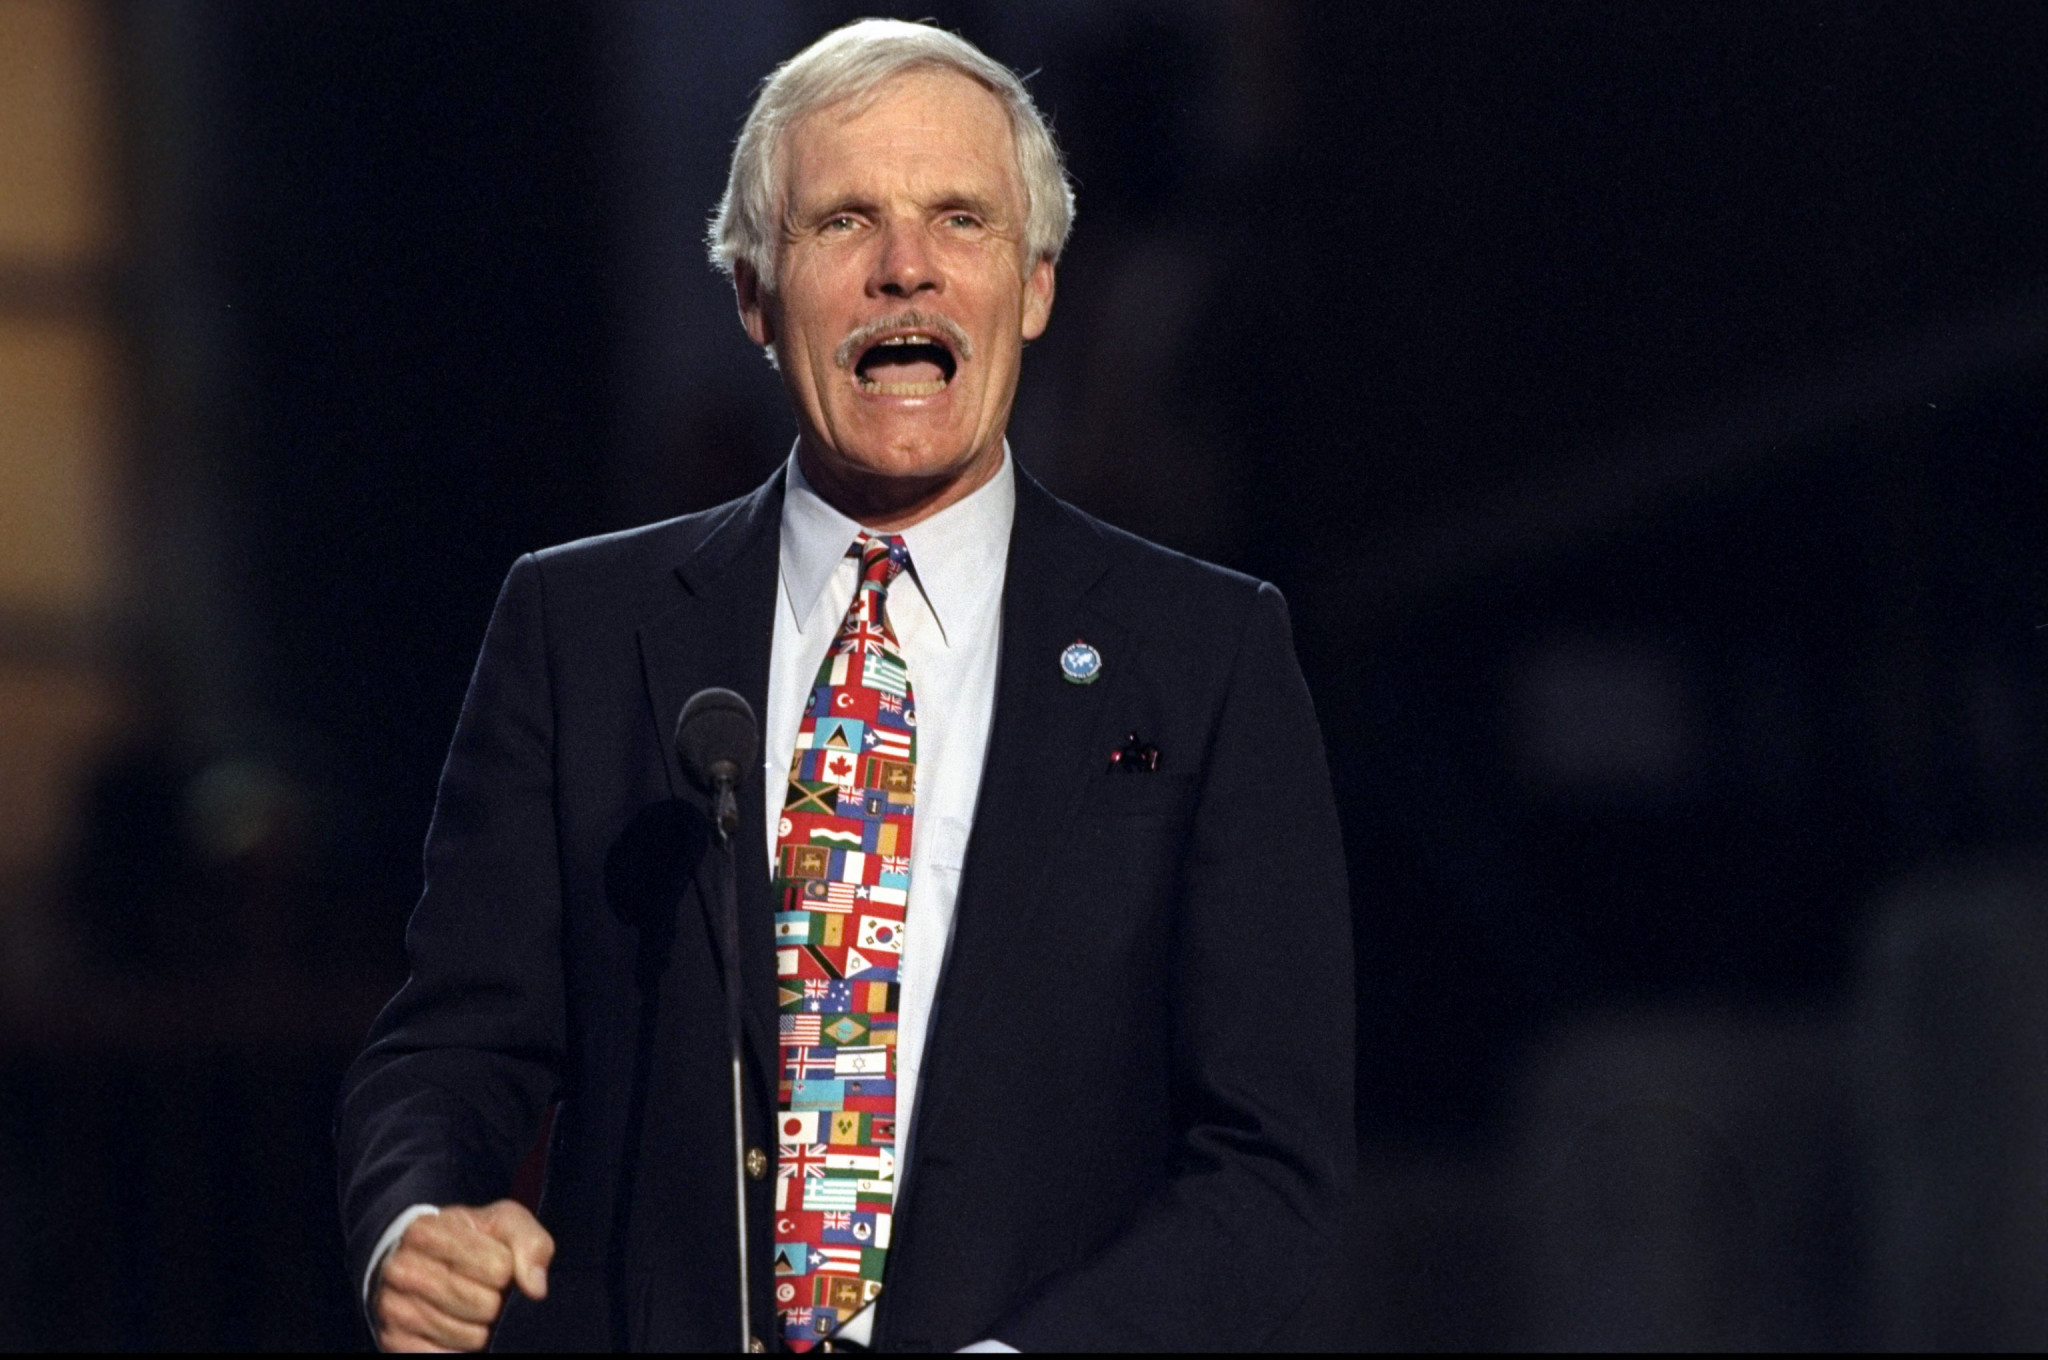 Television magnate Ted Turner founded the Goodwill Games ©Getty Images